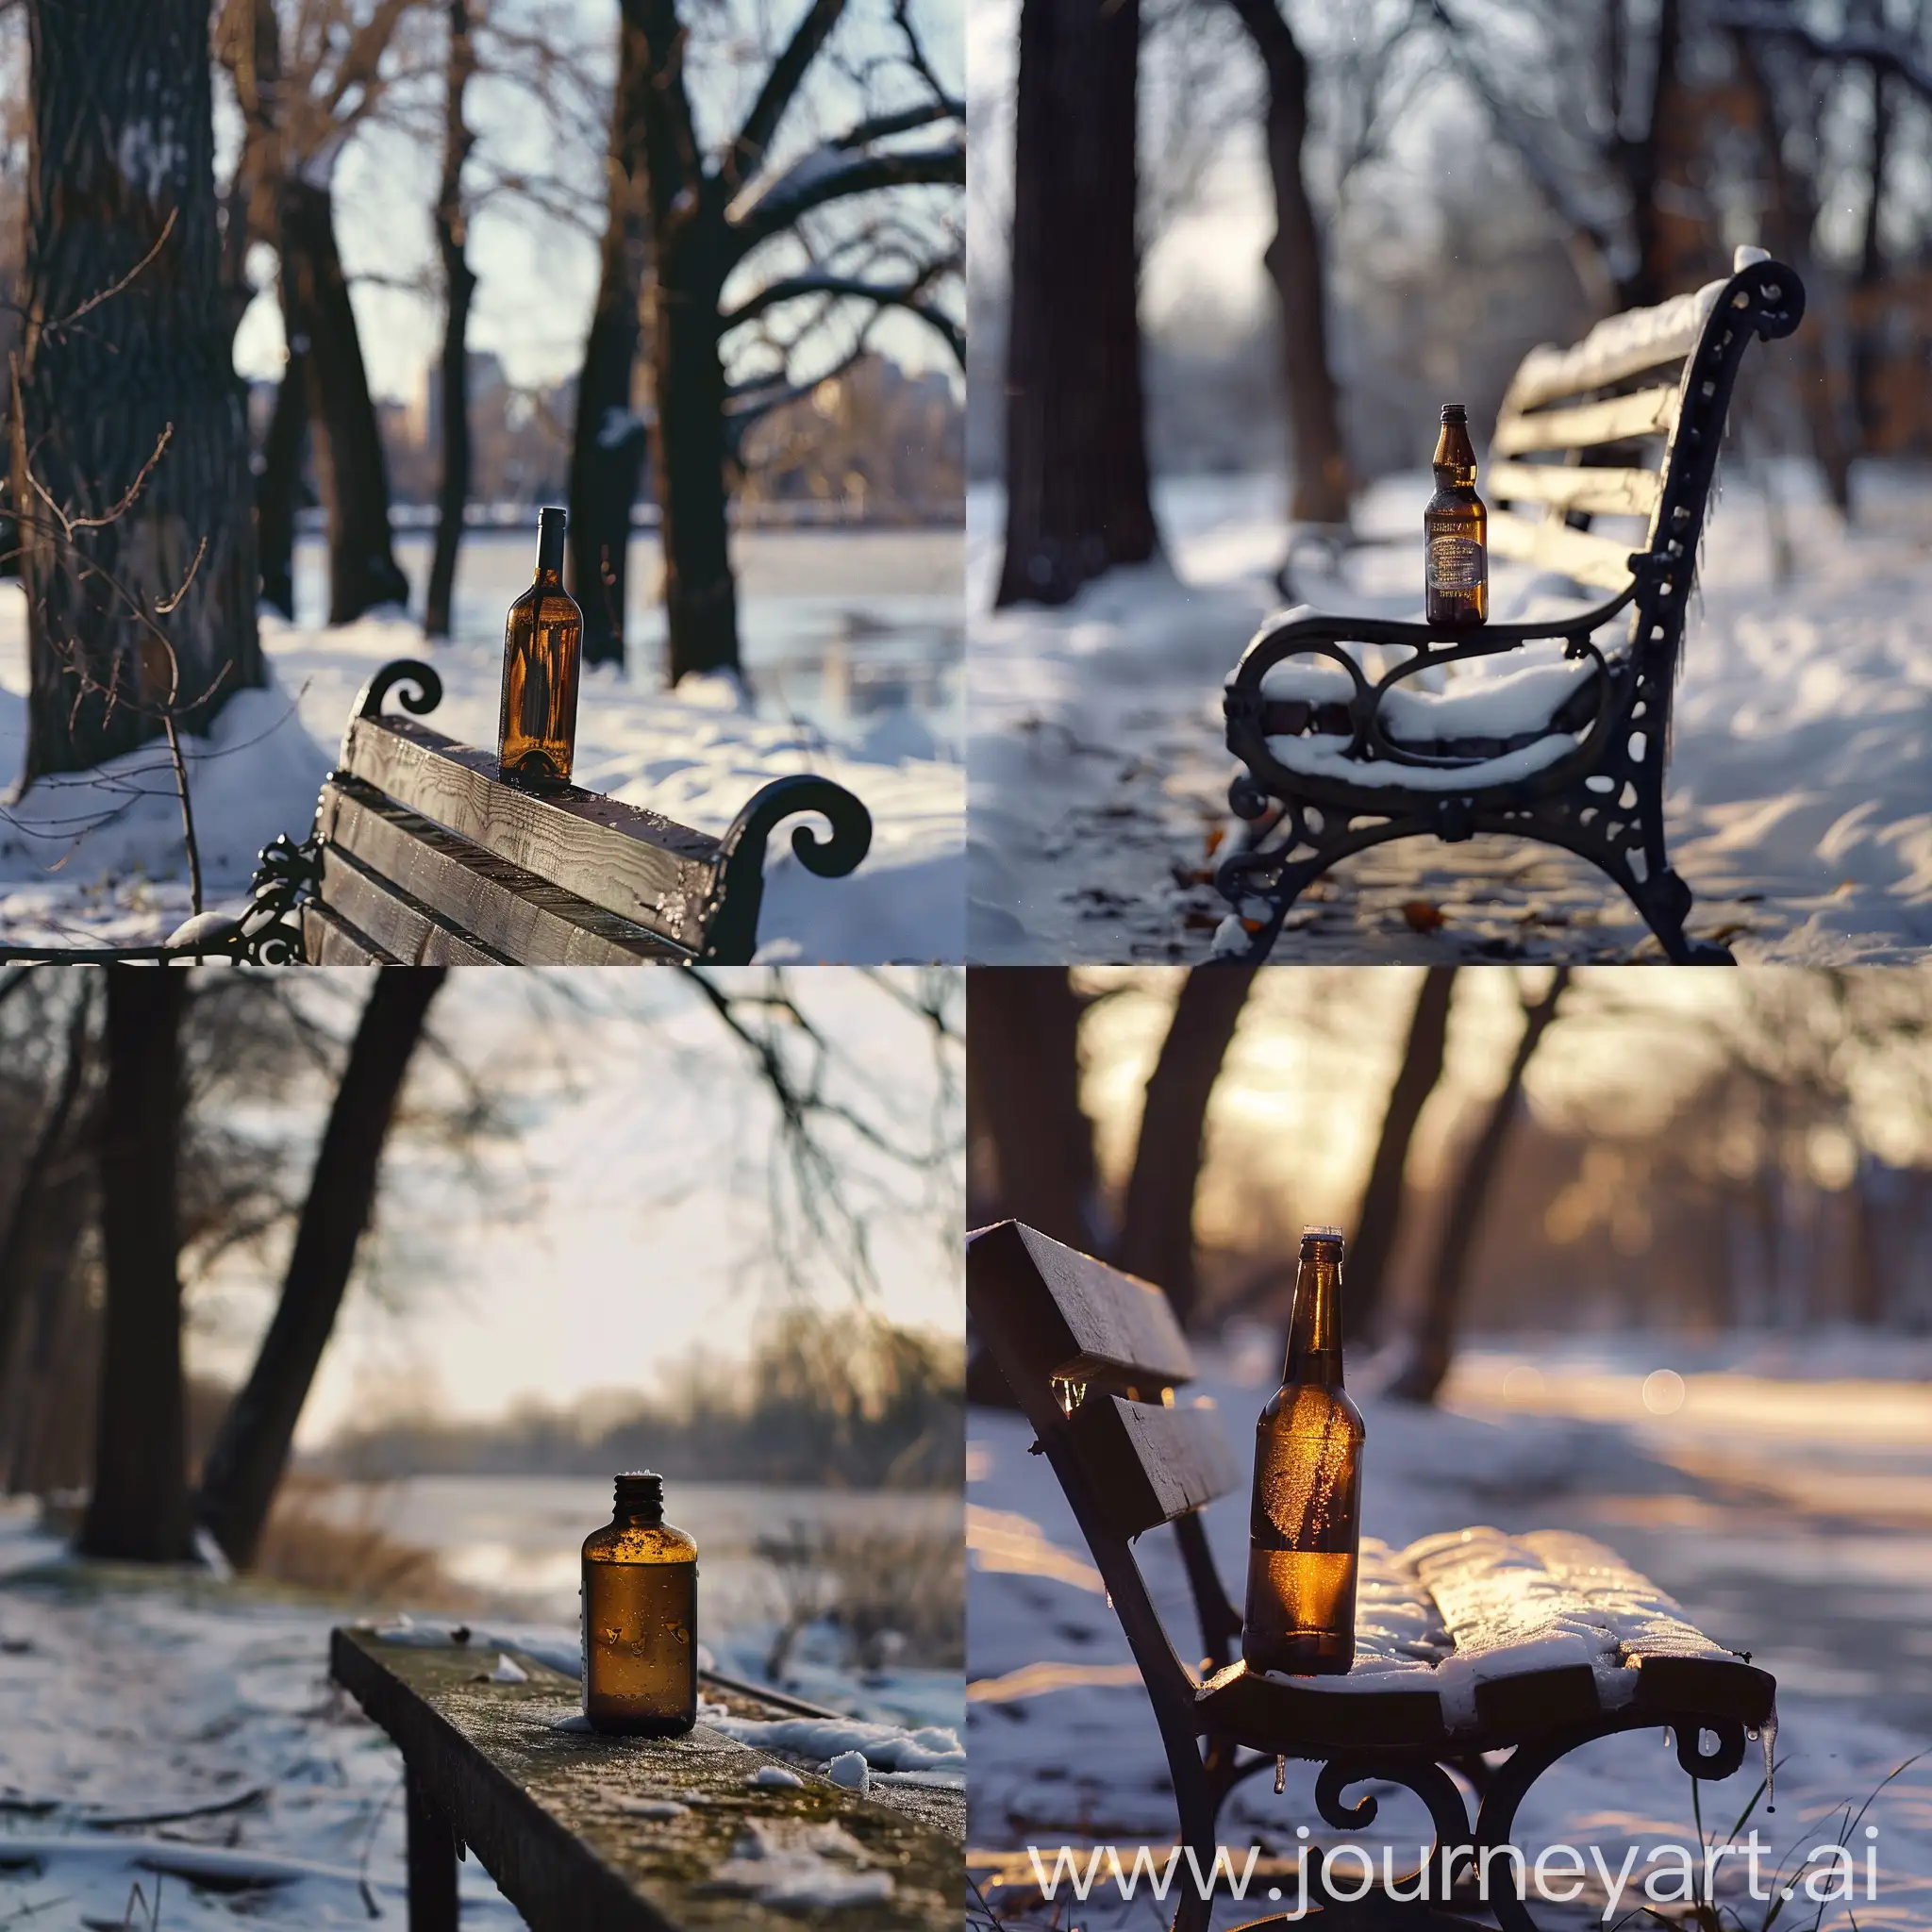 a bottle stands on a bench in winter